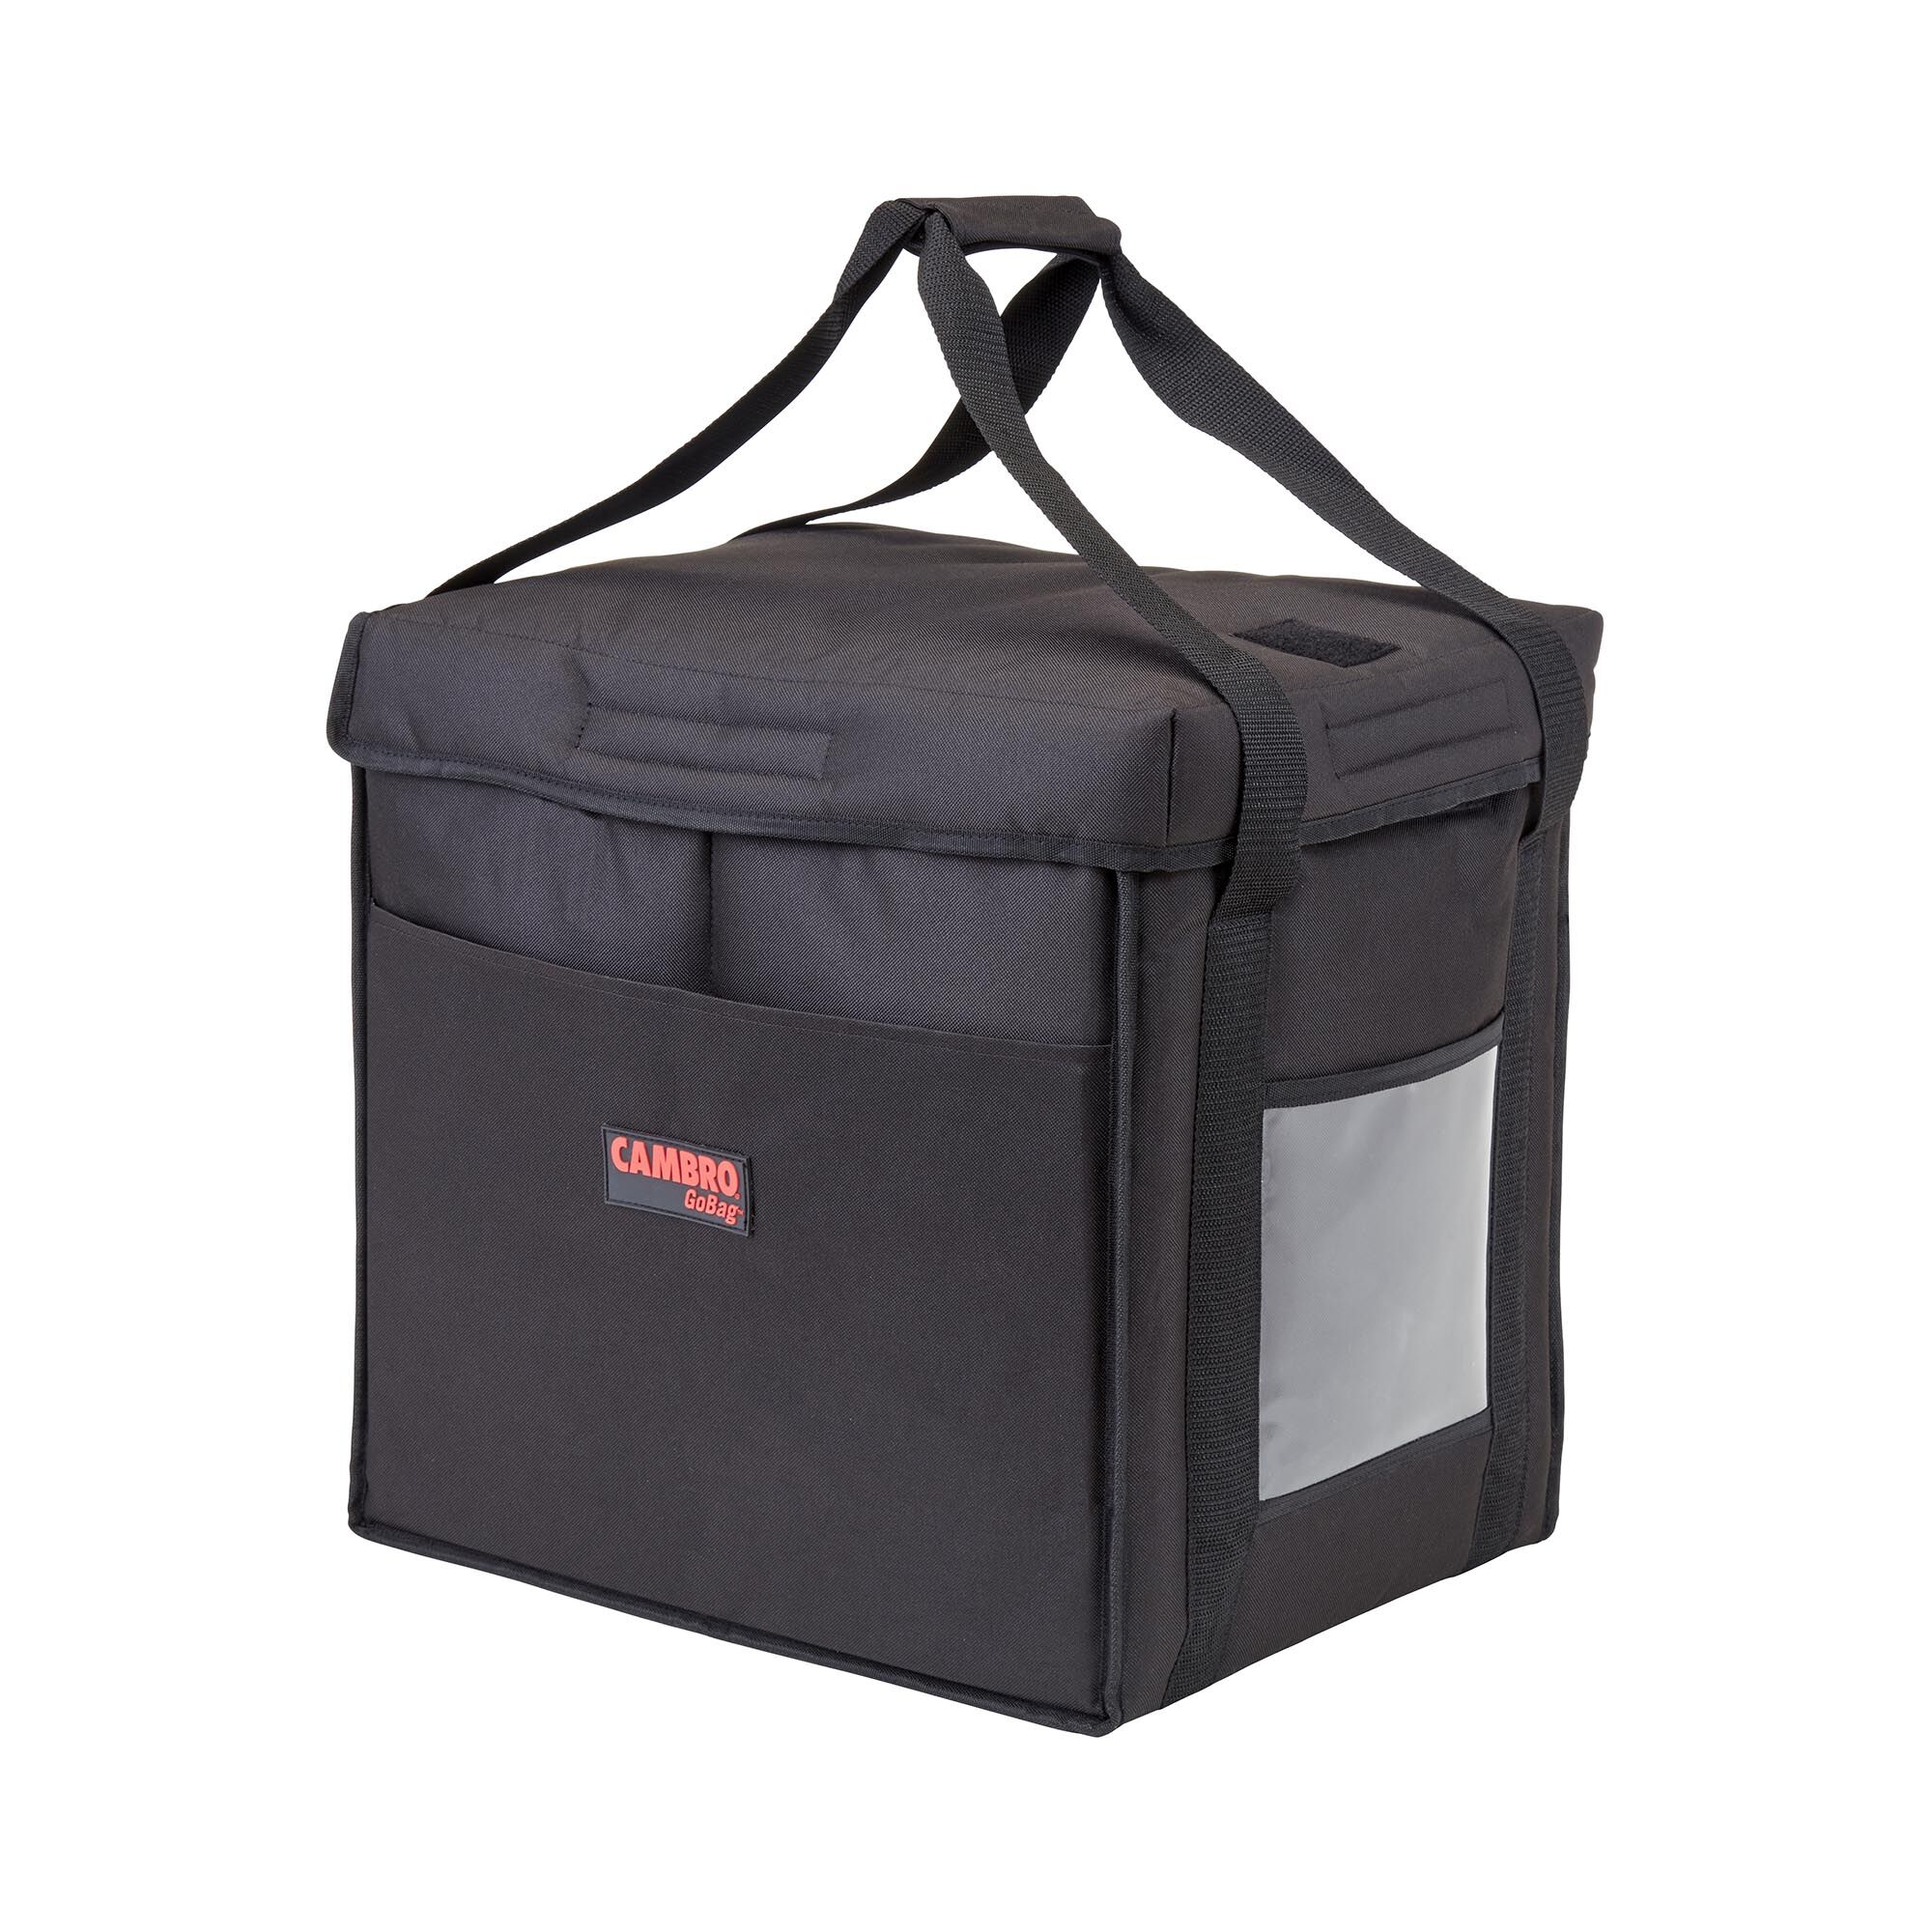 CAMBRO Food Delivery Bag - 30.5 x 38 x 38 cm - Black - foldable